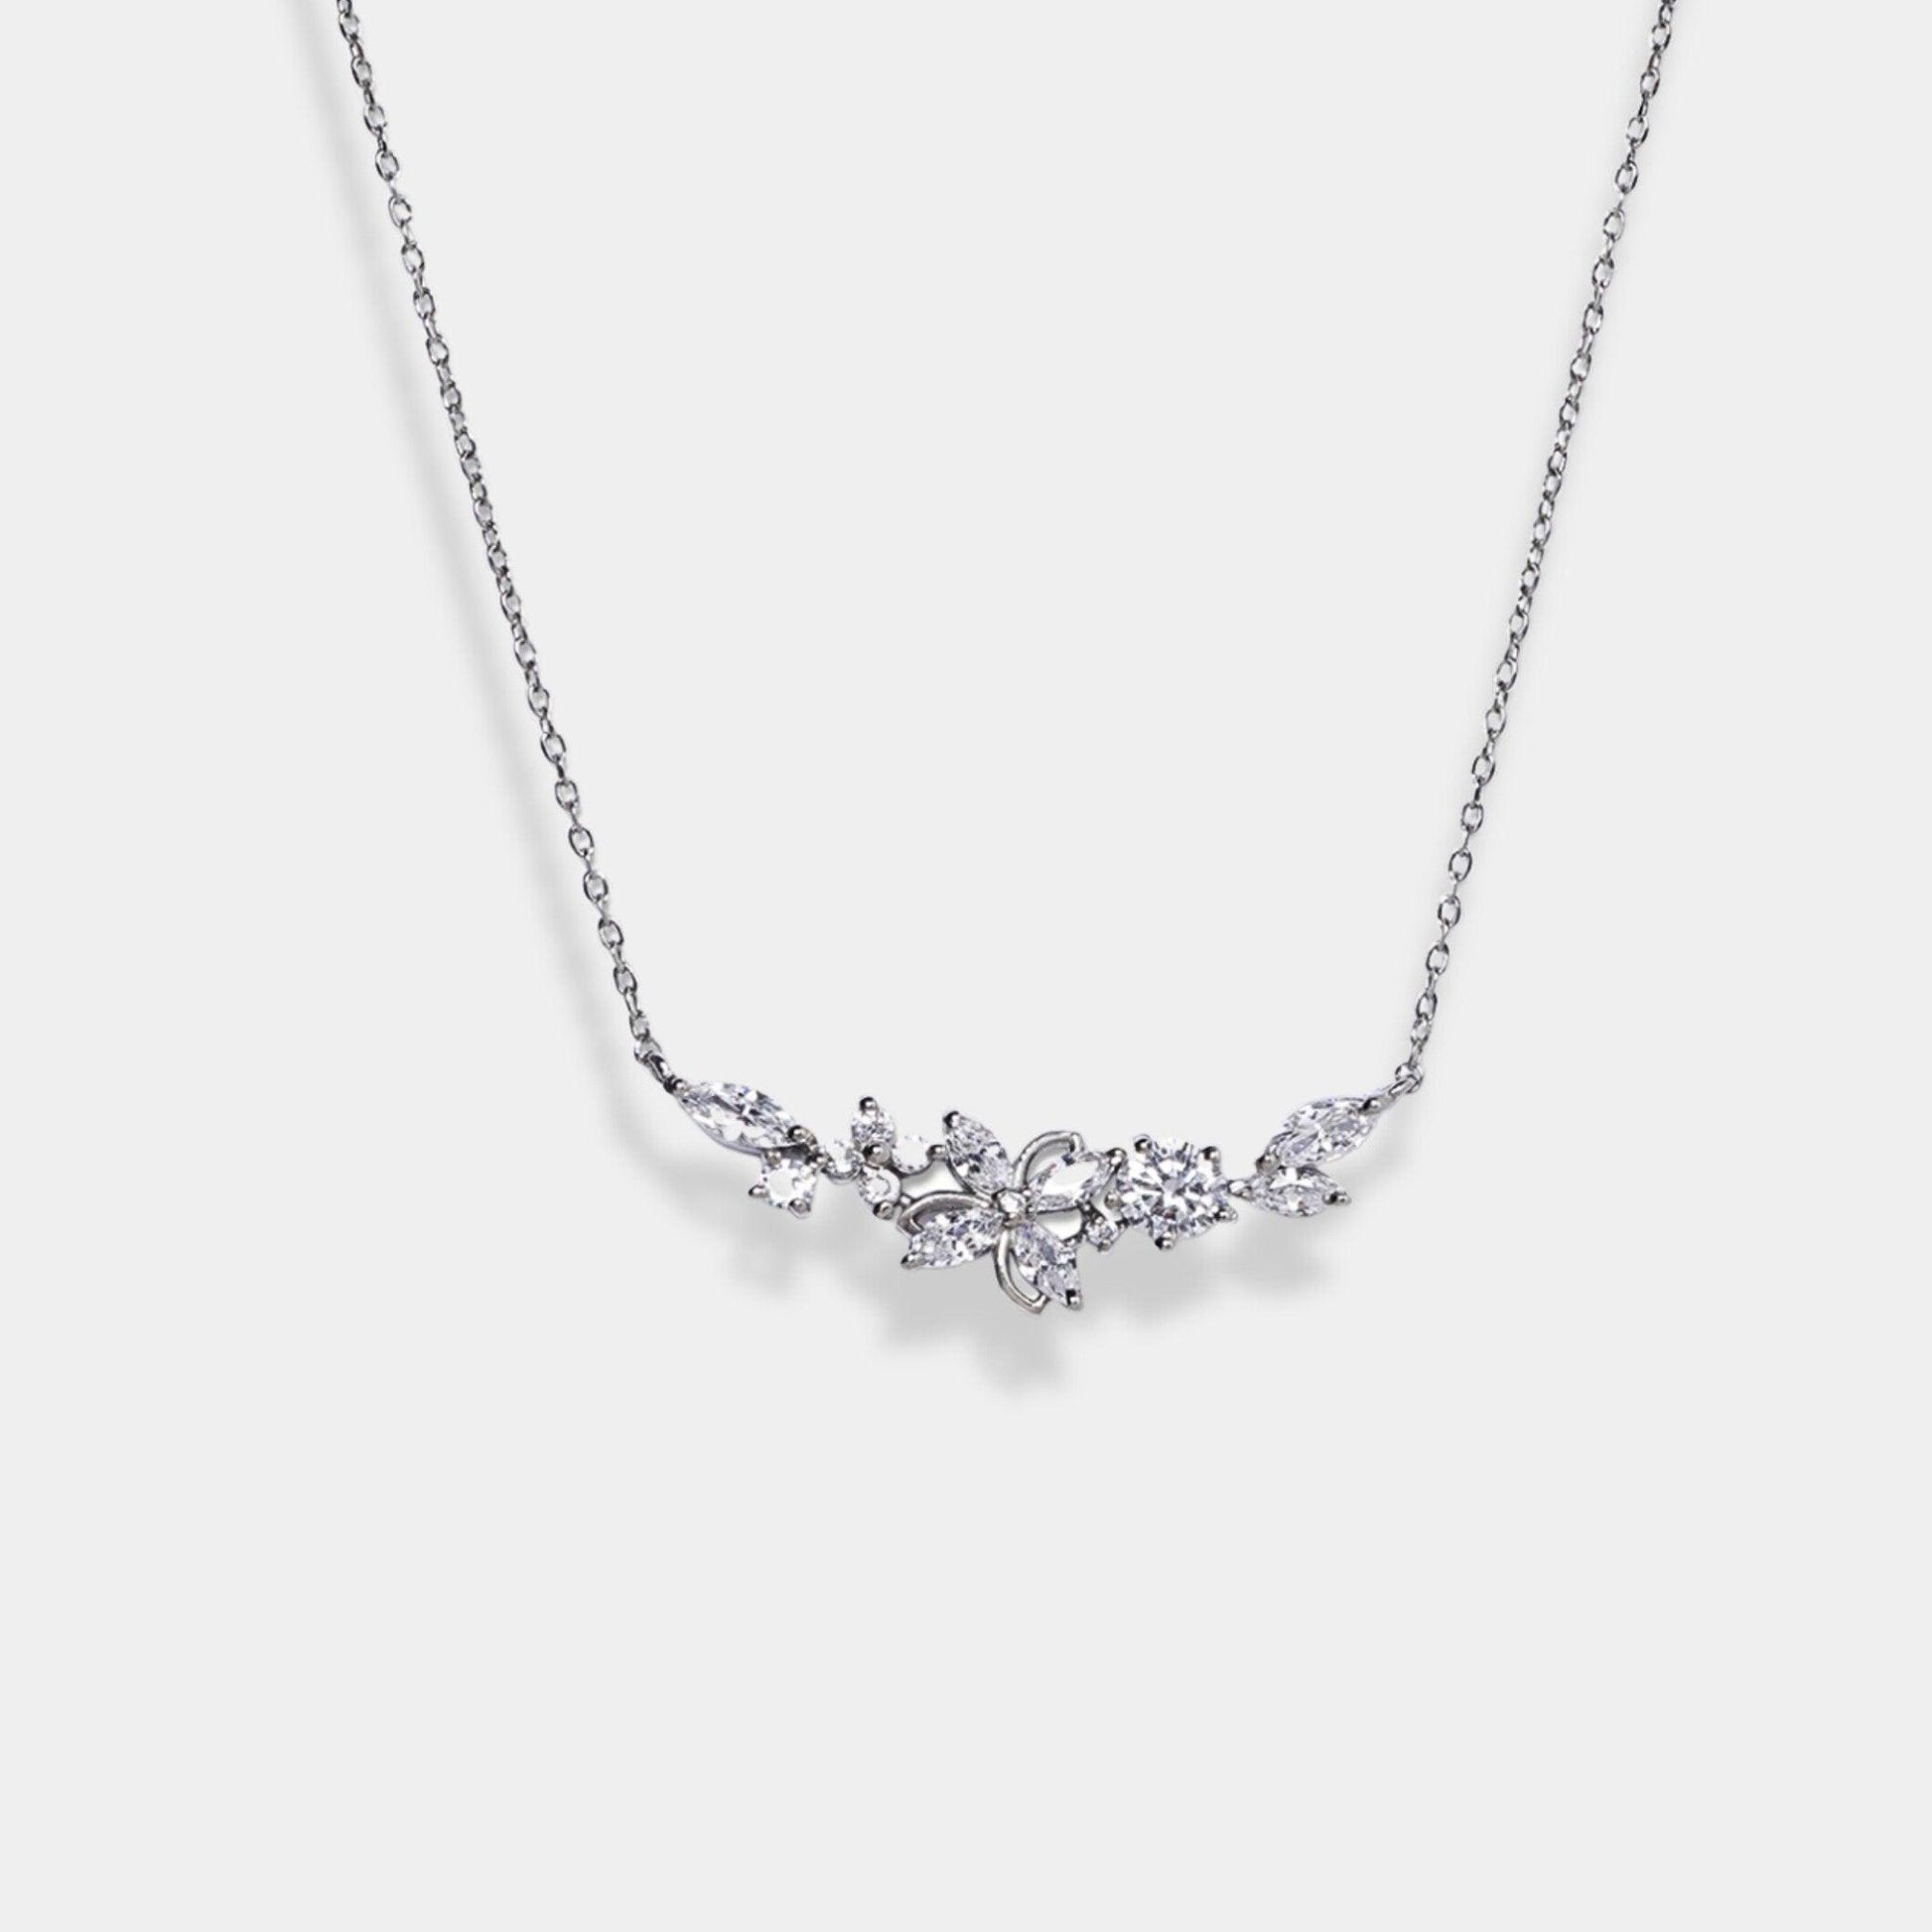 A stunning sterling silver necklace adorned with sparkling